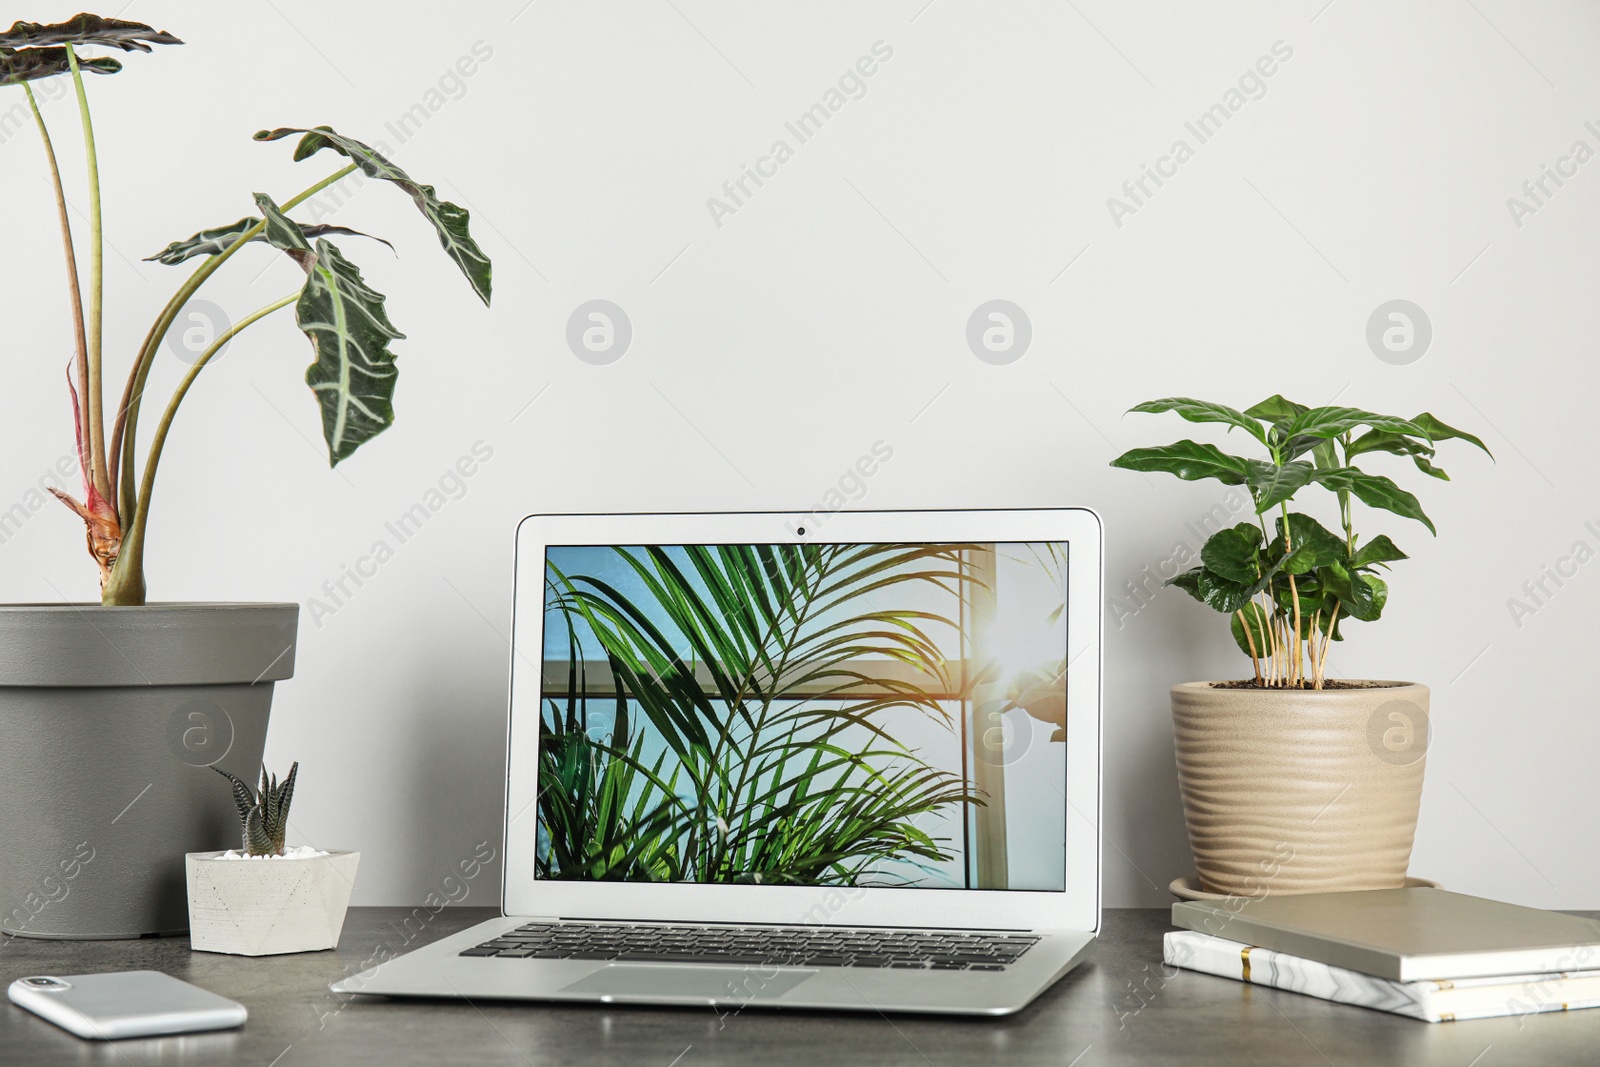 Photo of Laptop on table and houseplants in office interior, space for text